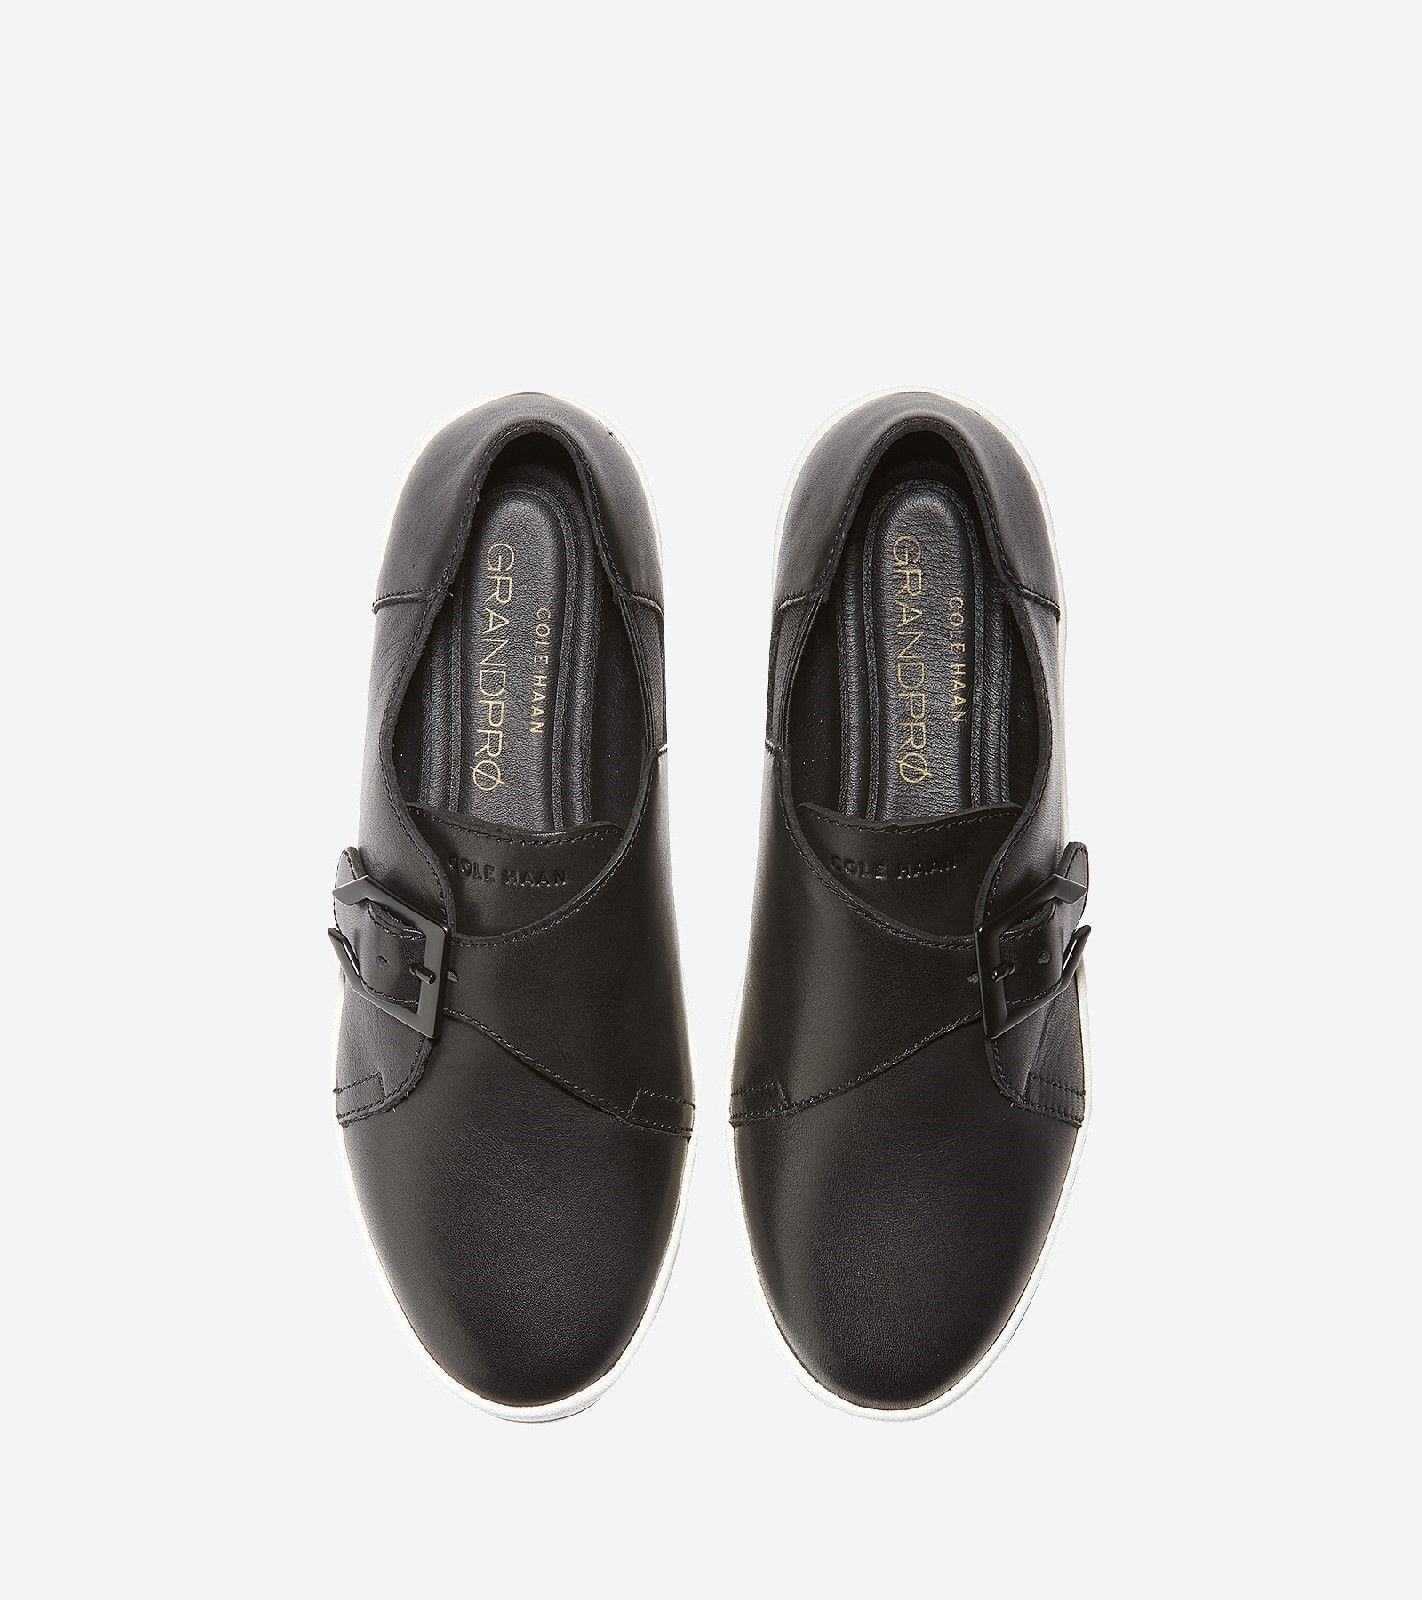 Street-ready and stylish, the GrandPro Spectator Monk Slip-On redefines comfort. With our Grand.OS rubber outsole and adjustable monk strap design, they're built to comfort your every move. A retro skateboard shoe design with dress oxford vibes. Leather, nubuck and ocelot haircalf uppers..